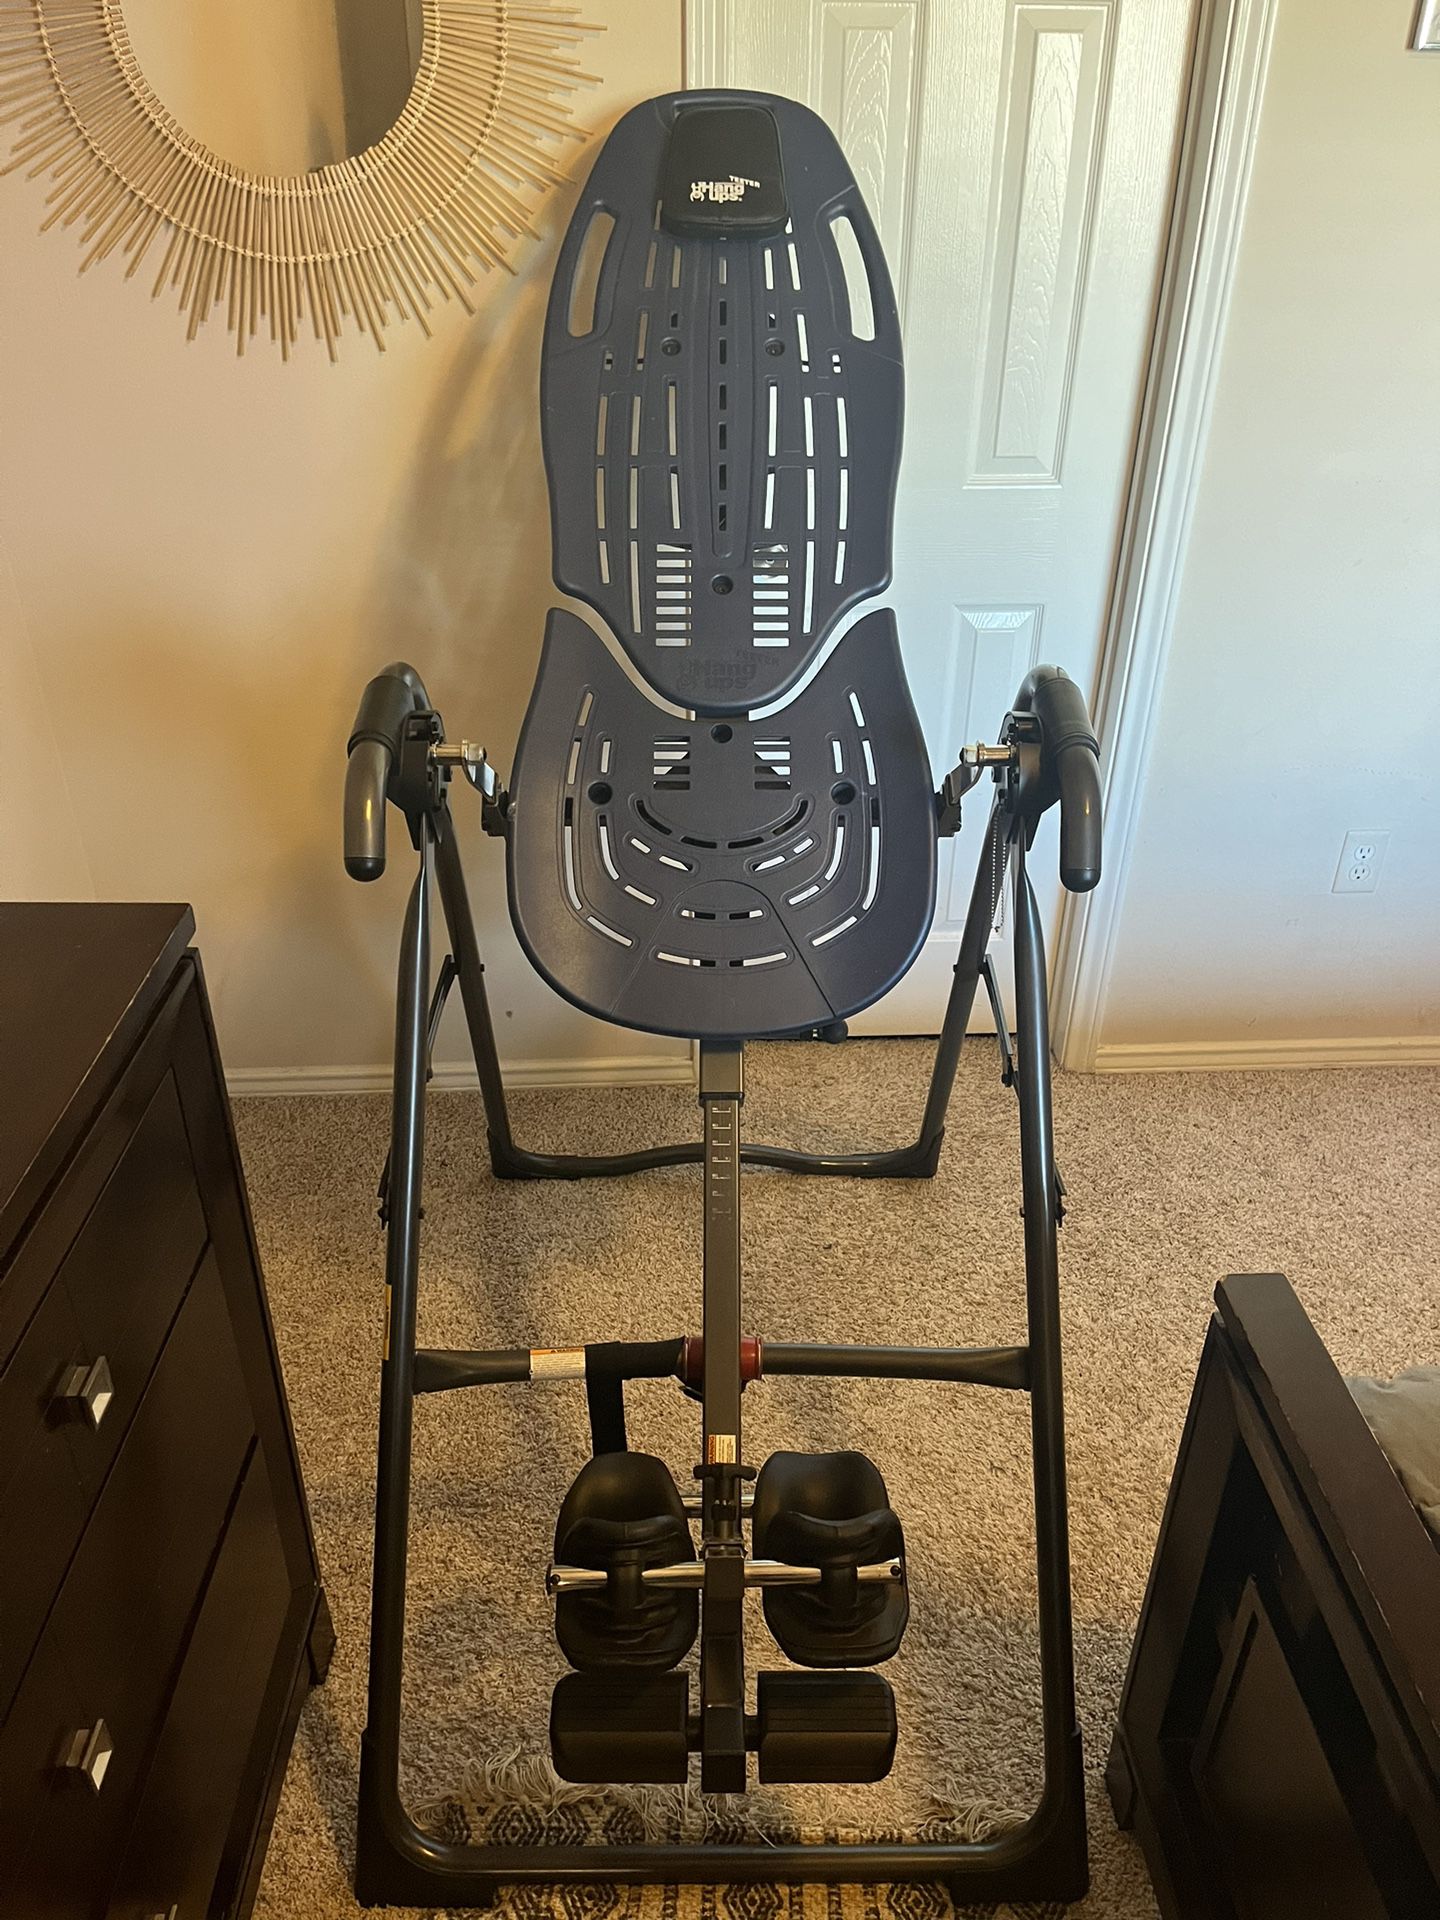 Teeter EP-560 Ltd Inversion Table for Back Pain